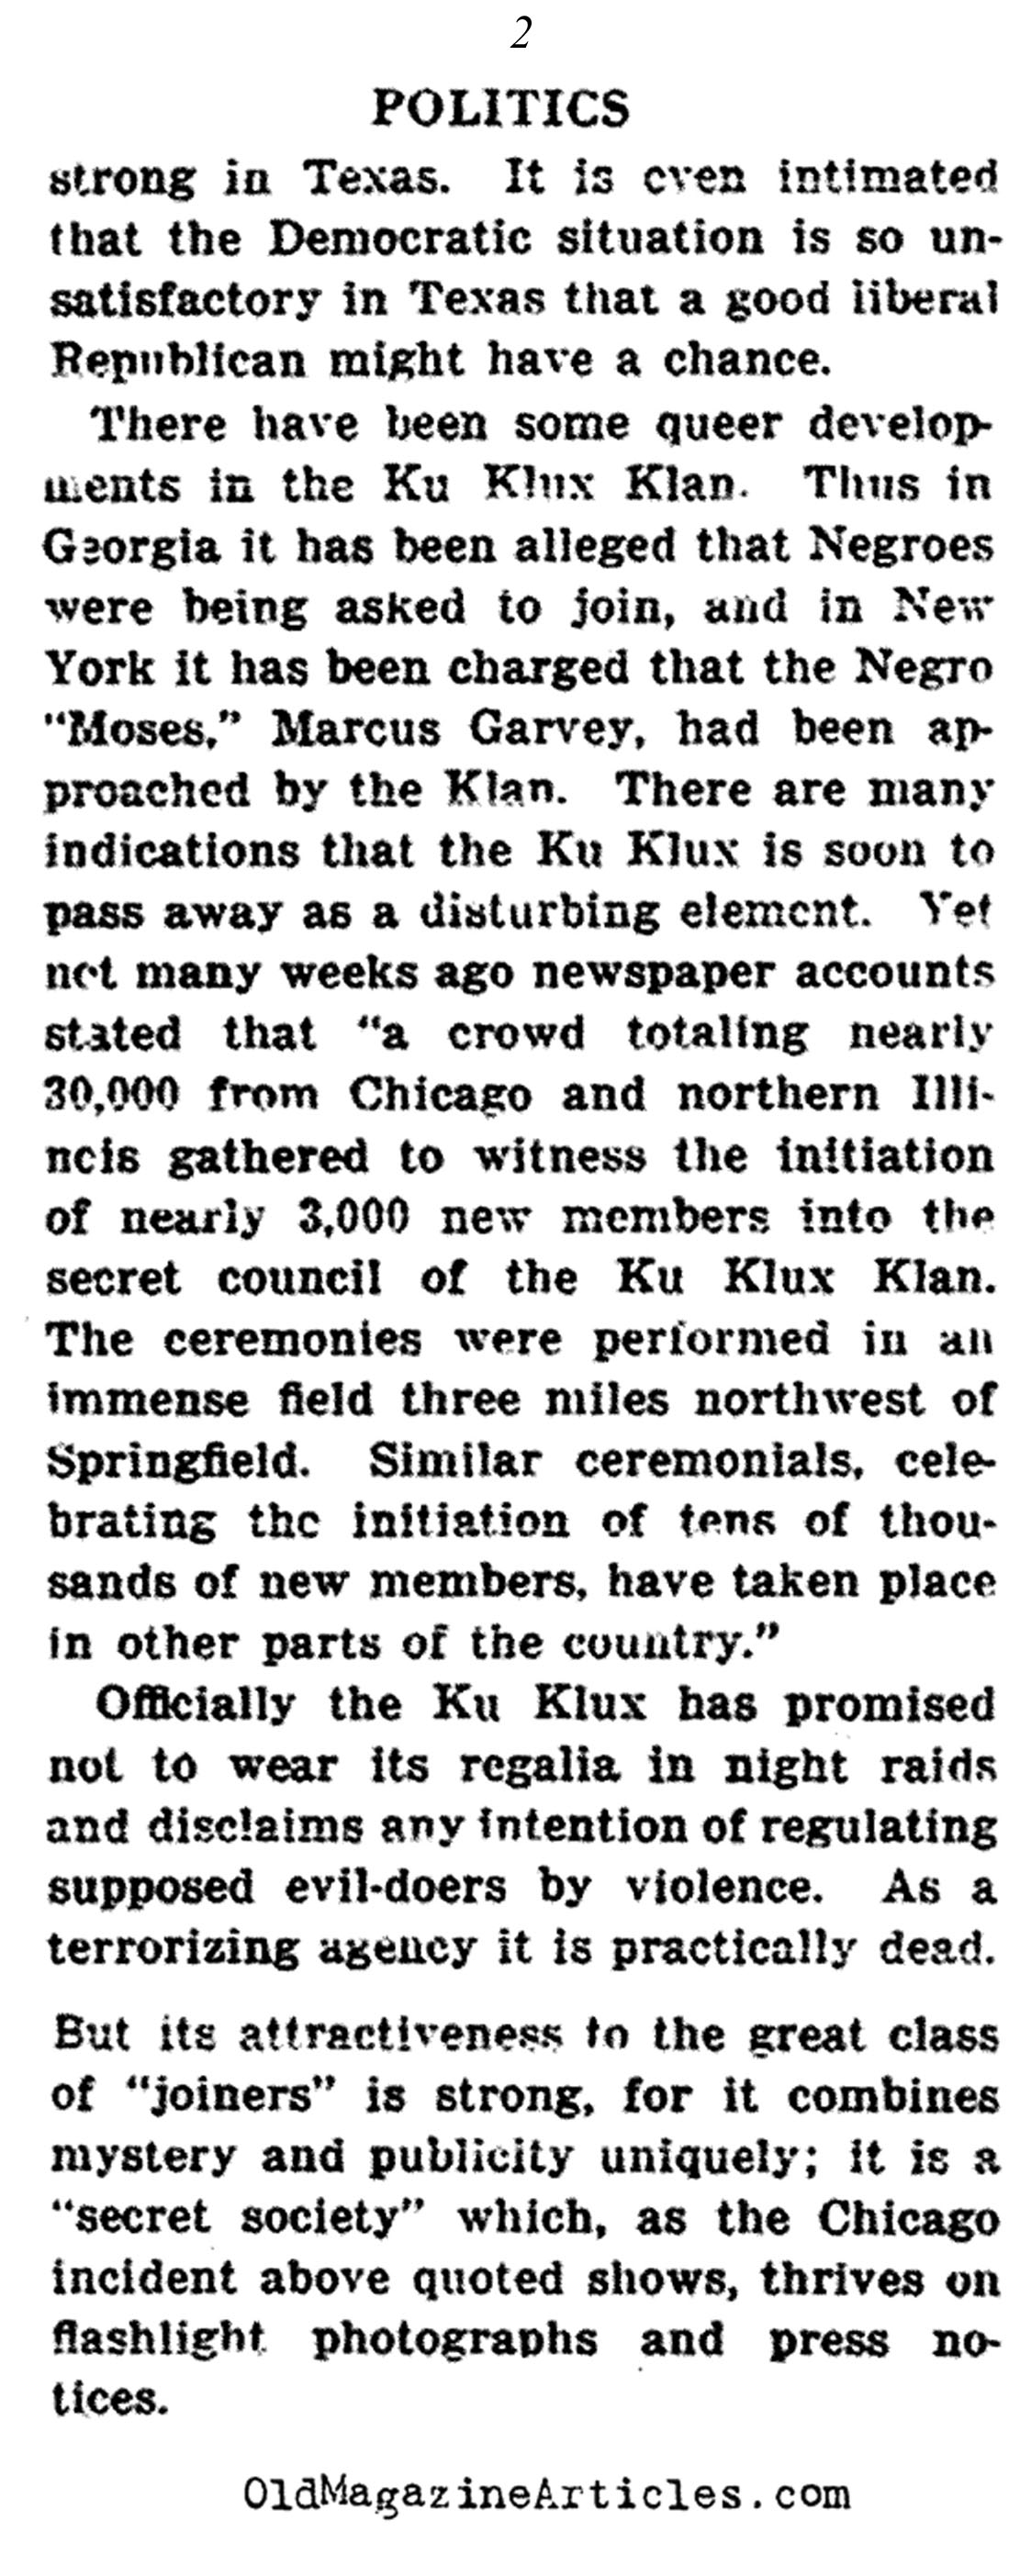 Weird Rumors About the Klan...  (The Outlook, 1922)